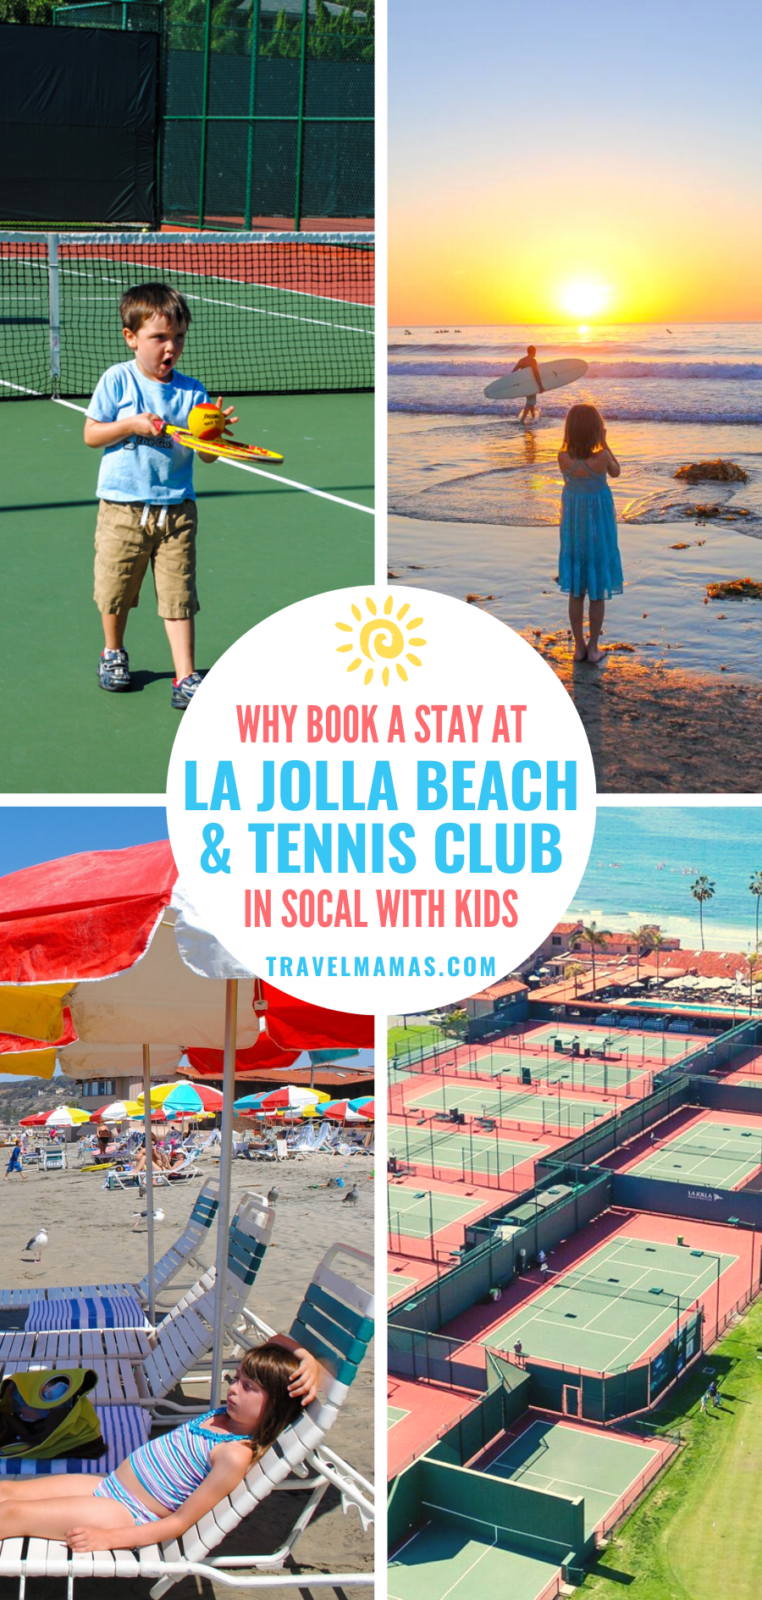 Why Stay at La Jolla Beach and Tennis Club with Kids